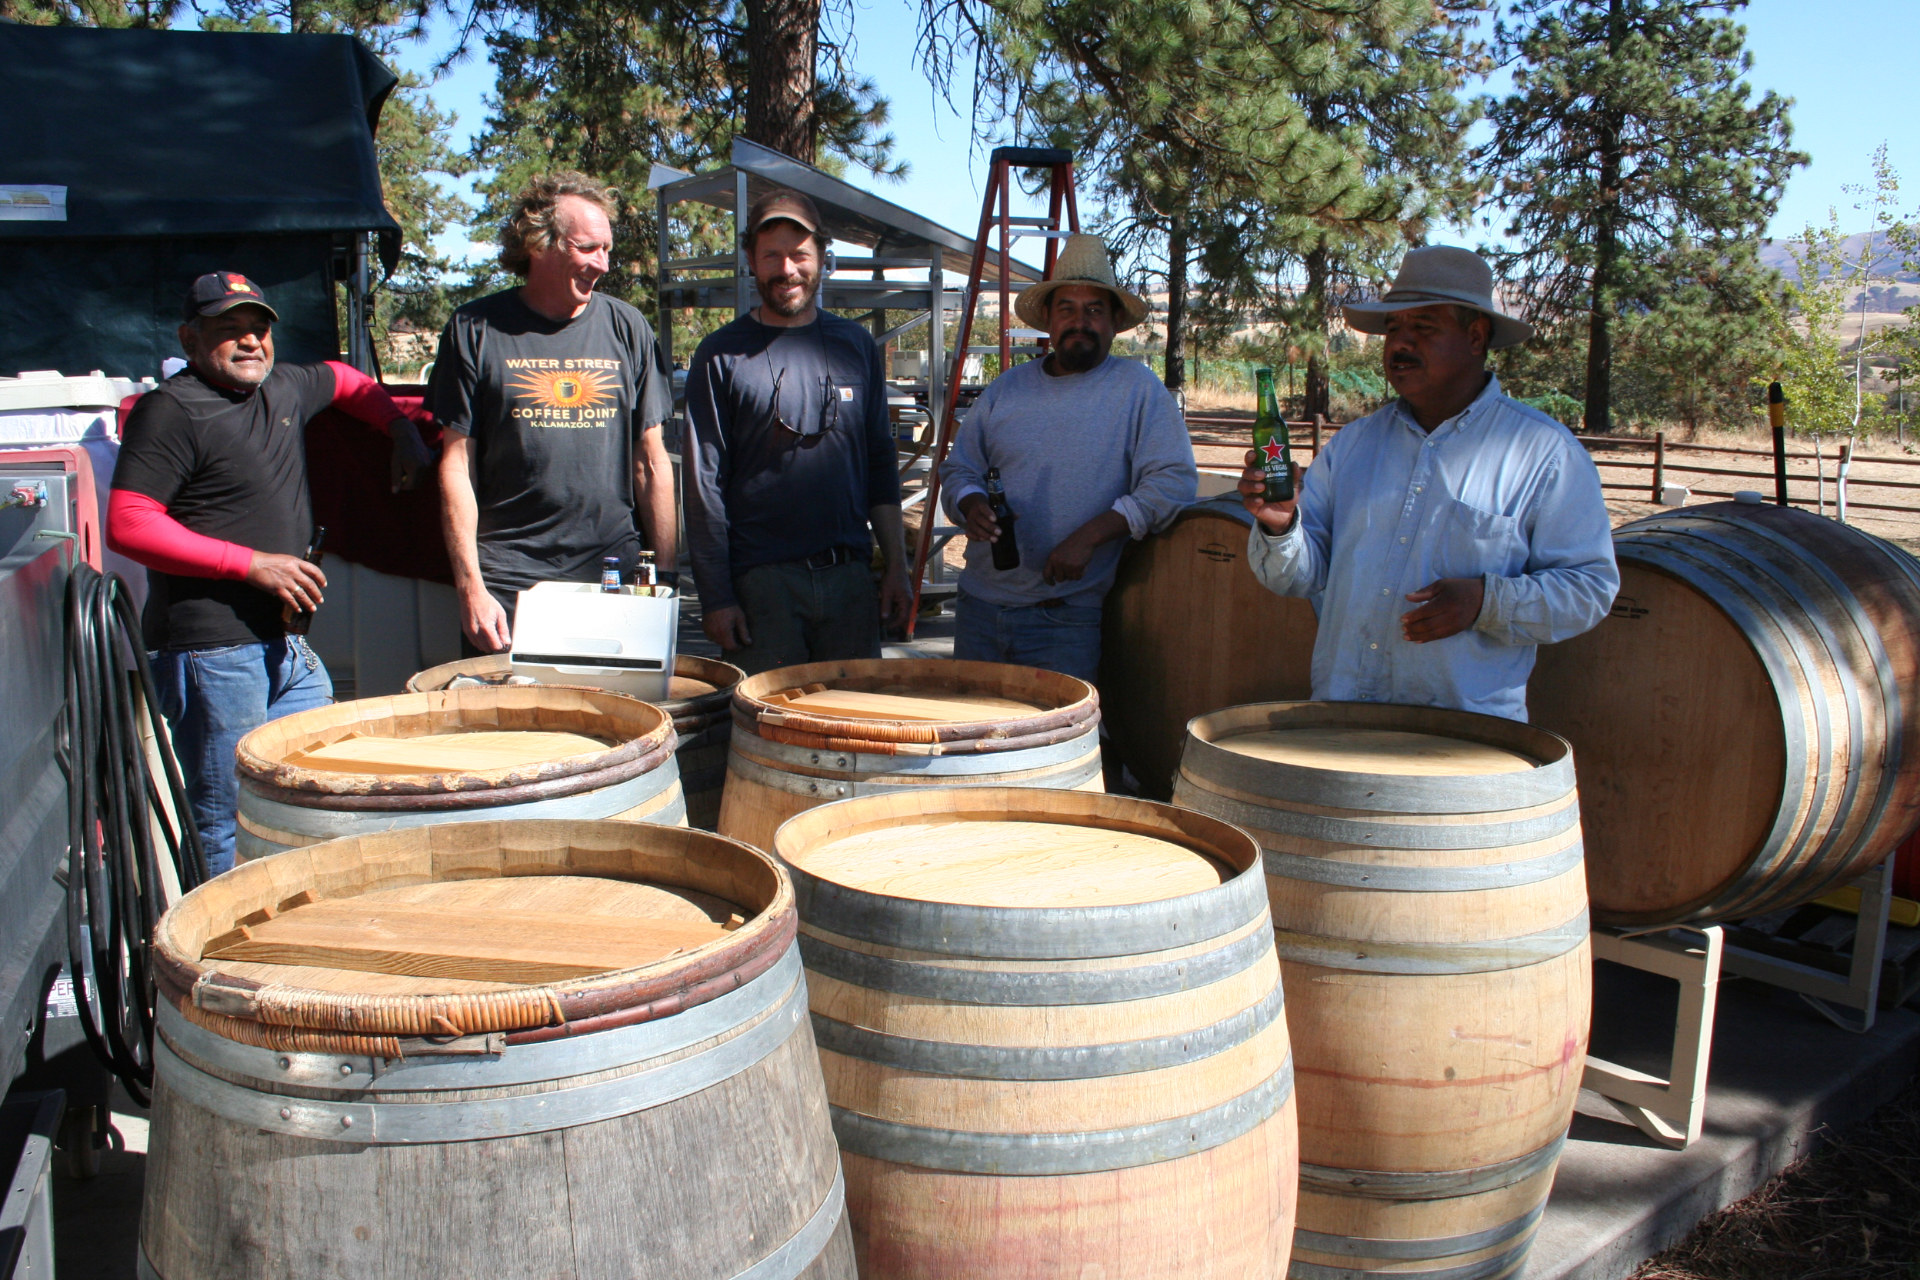 Owners and workers gathered around barrels